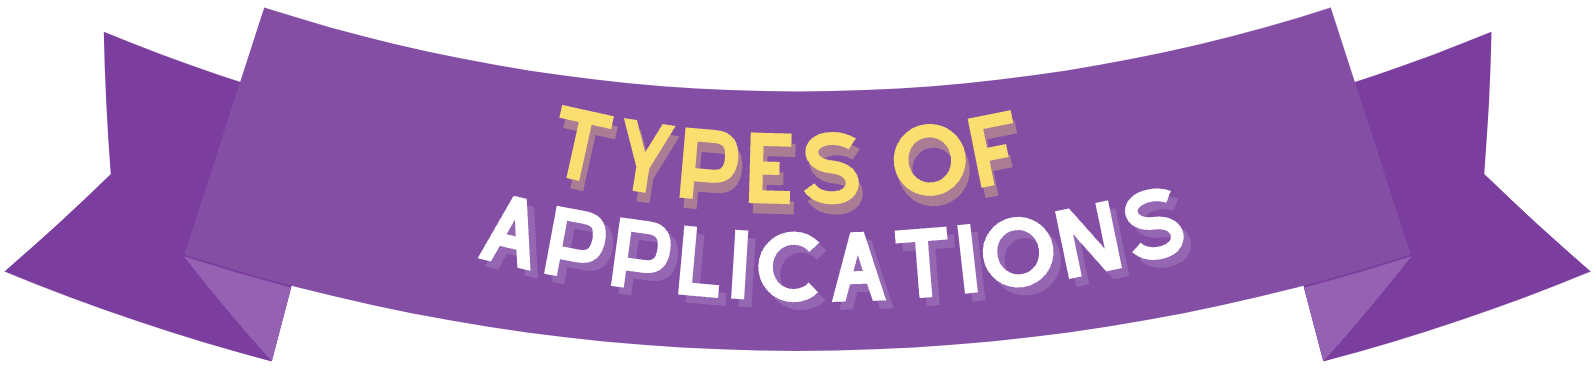 types of applications banner